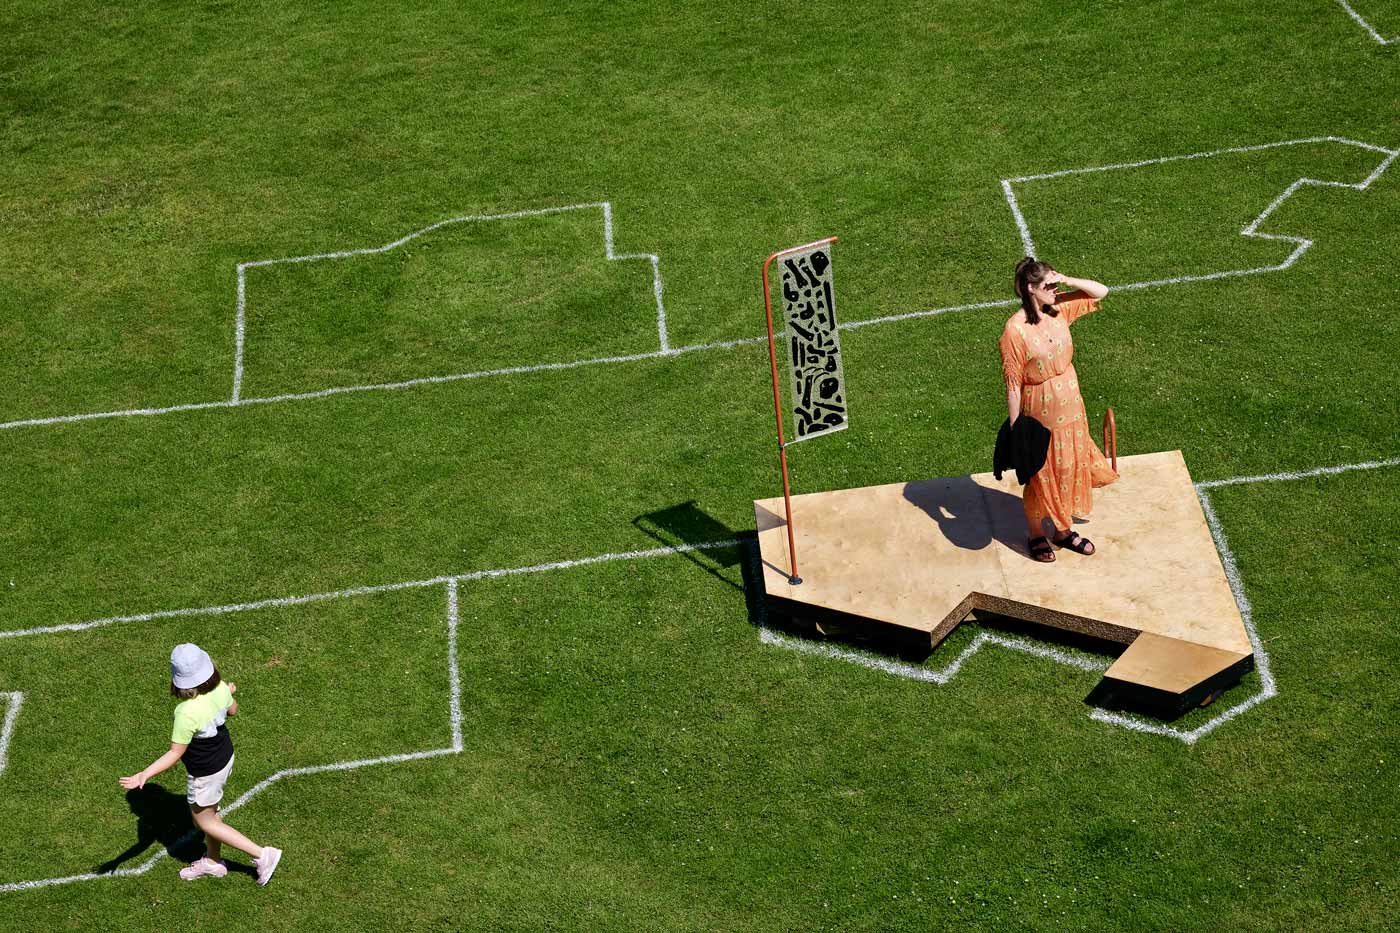 Exterior installation photograph of a green lawn with white geometric lines painted on the grass. A woman stands on a wooden installation seating structure